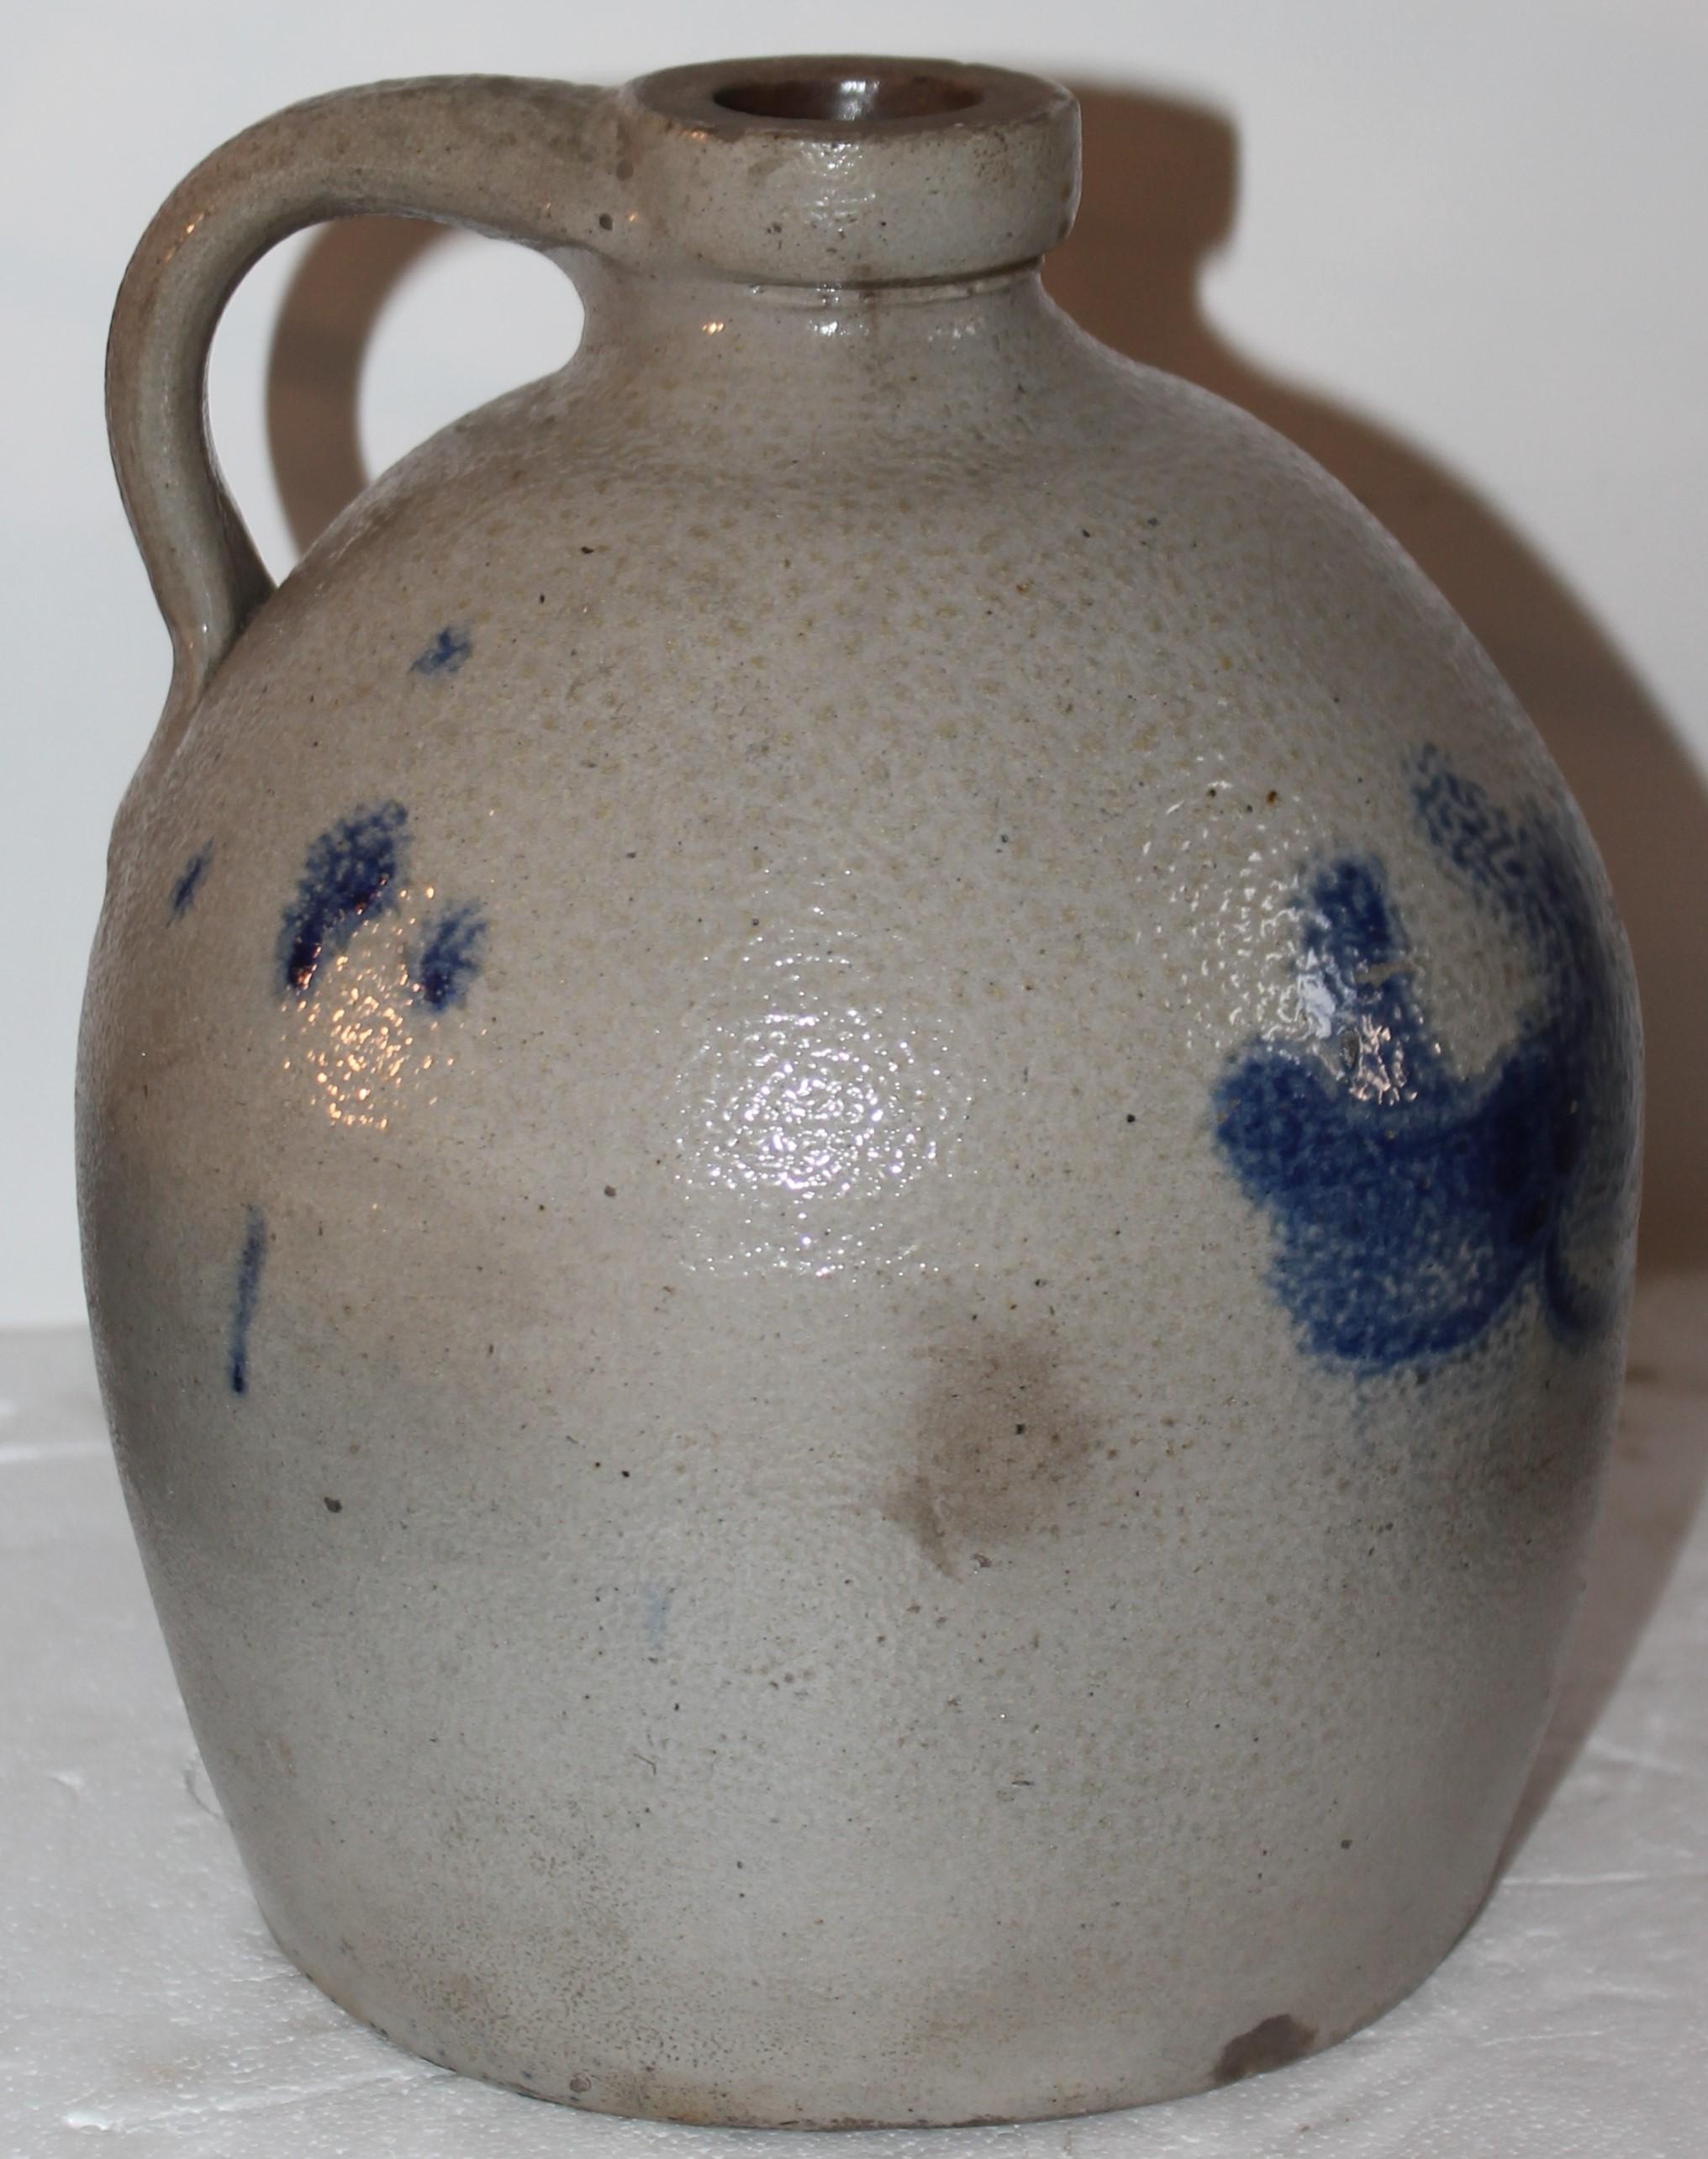 Cobalt blue painted pottery decorated floral stoneware handled jug. Measures: 9.5” high, 7” diameter.